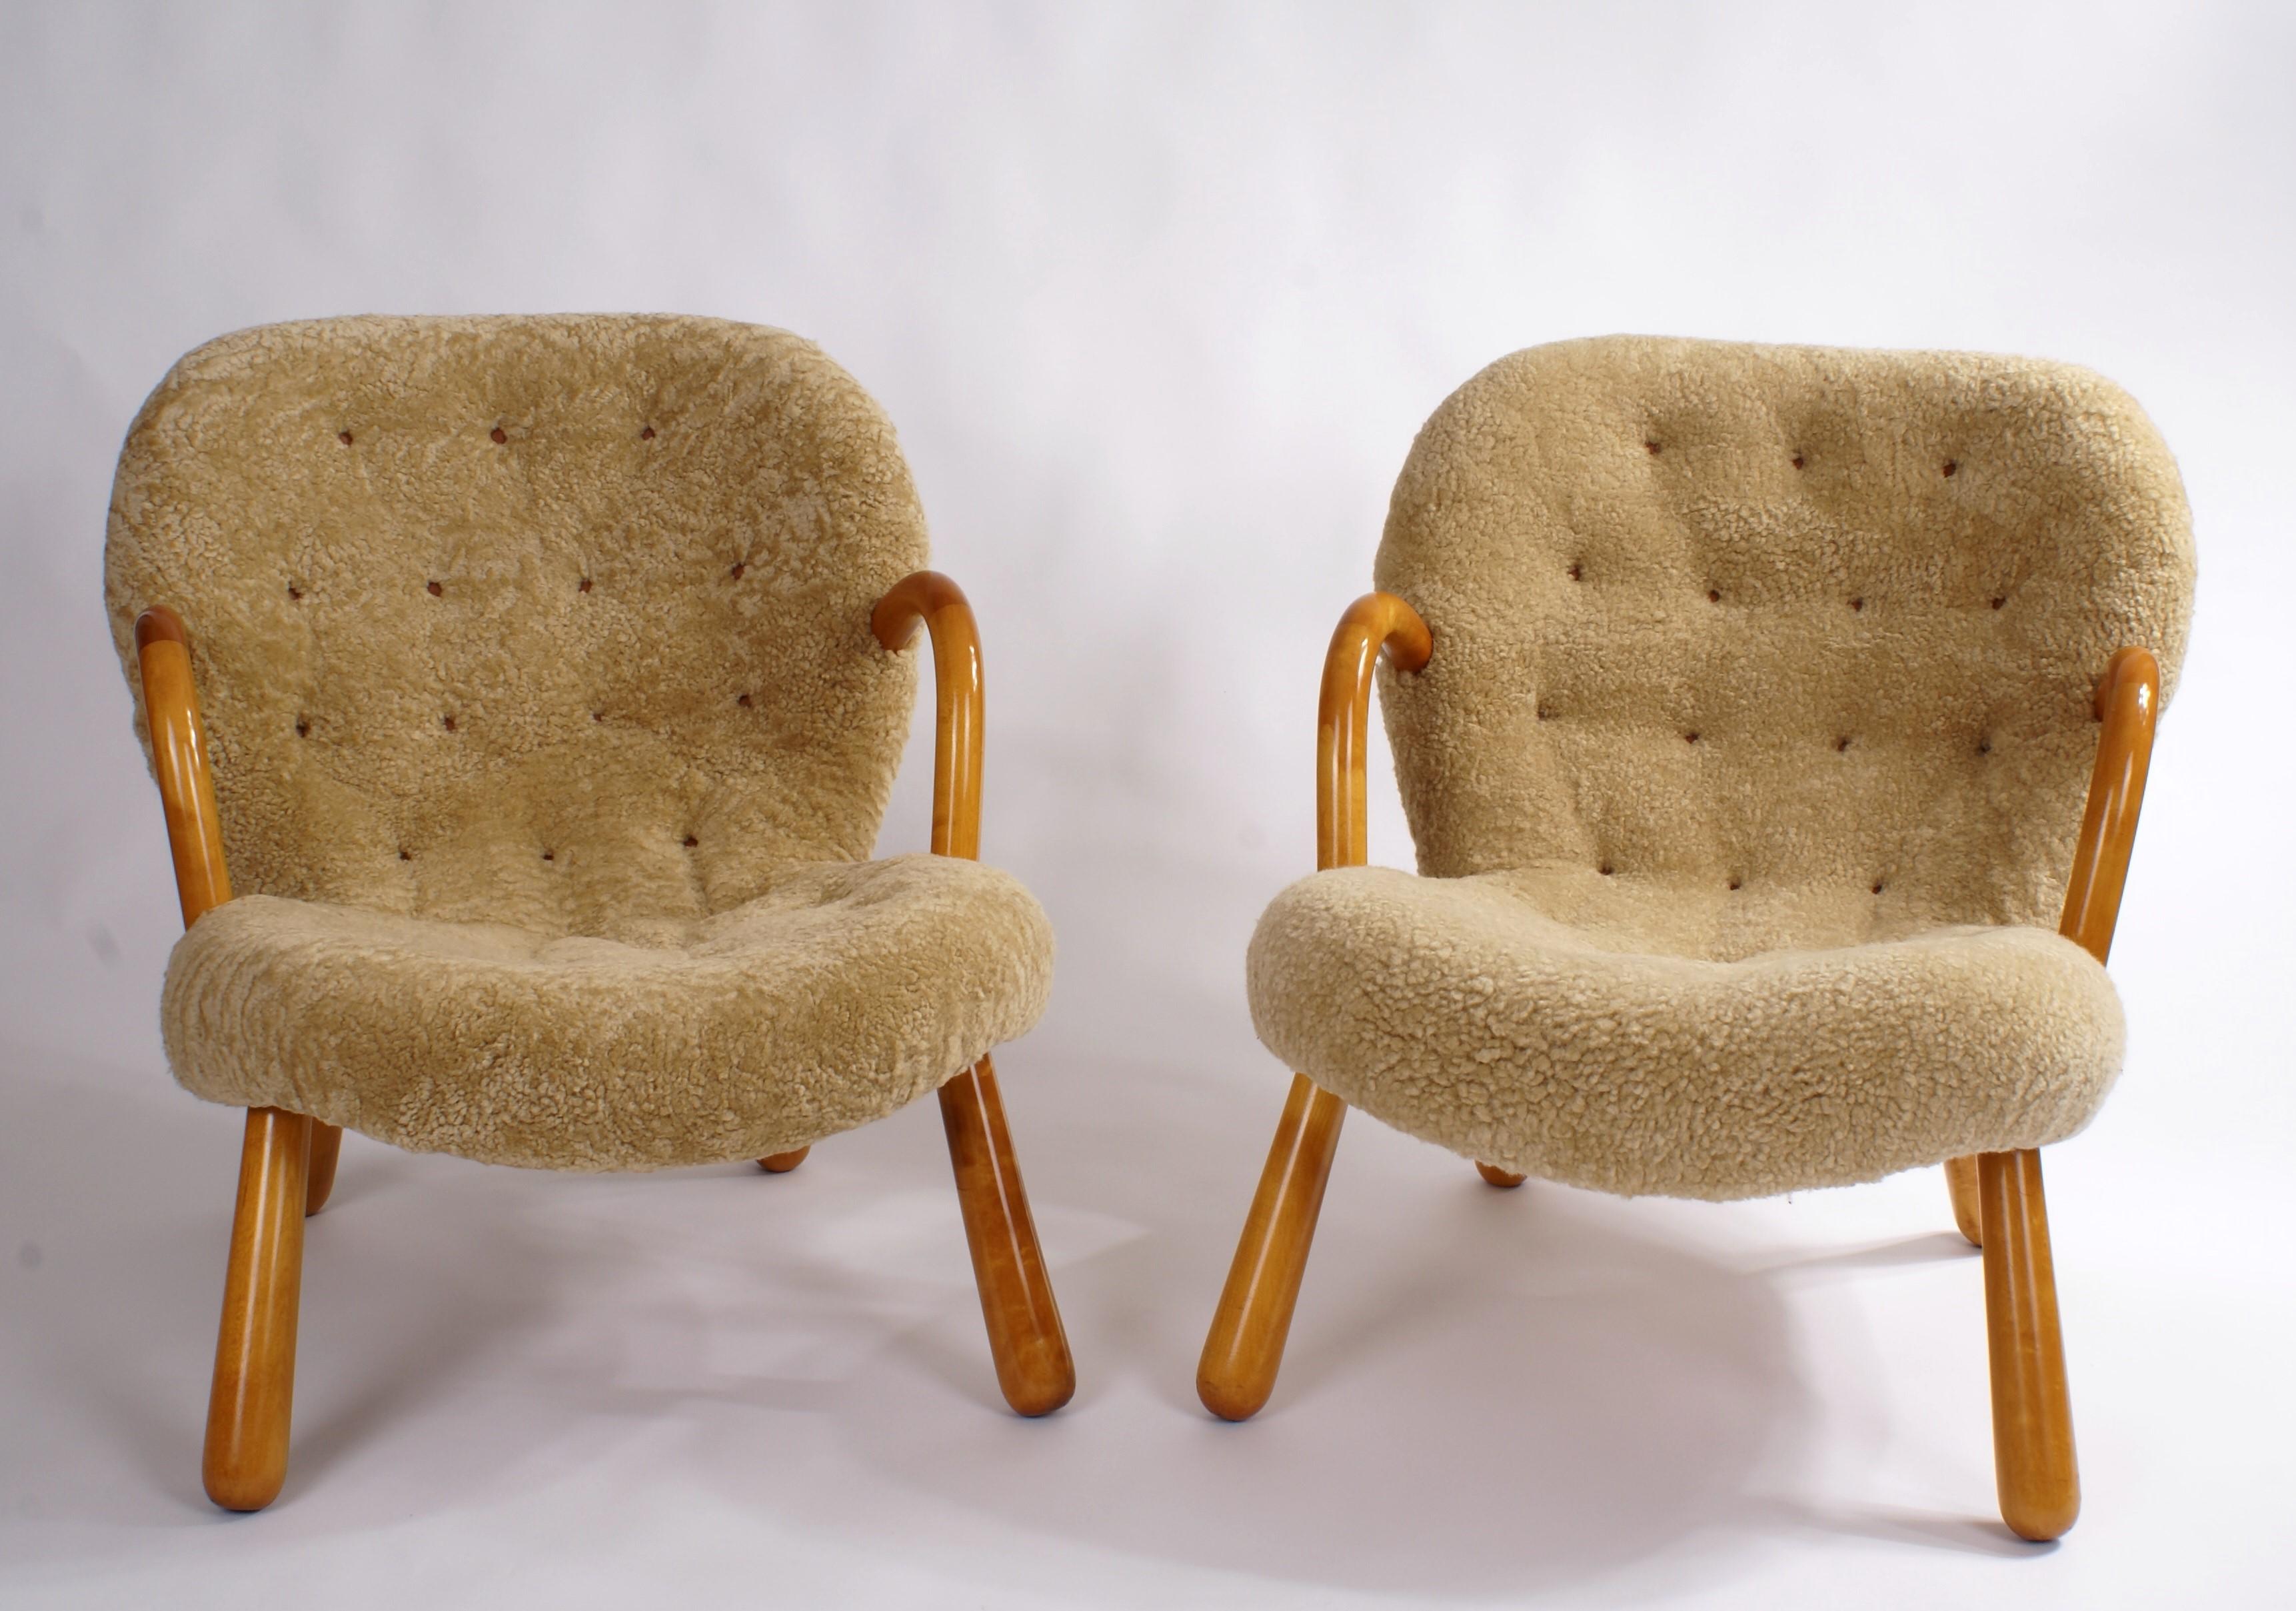 Pair of Philip Arctander 'clam' easy chairs in honey/natural coloured sheepskin and beech legs and armrests. Buttons in natural leather. Designed 1944.

The chairs are newly refinished and reupholstered in sheepskin.

Price is for the